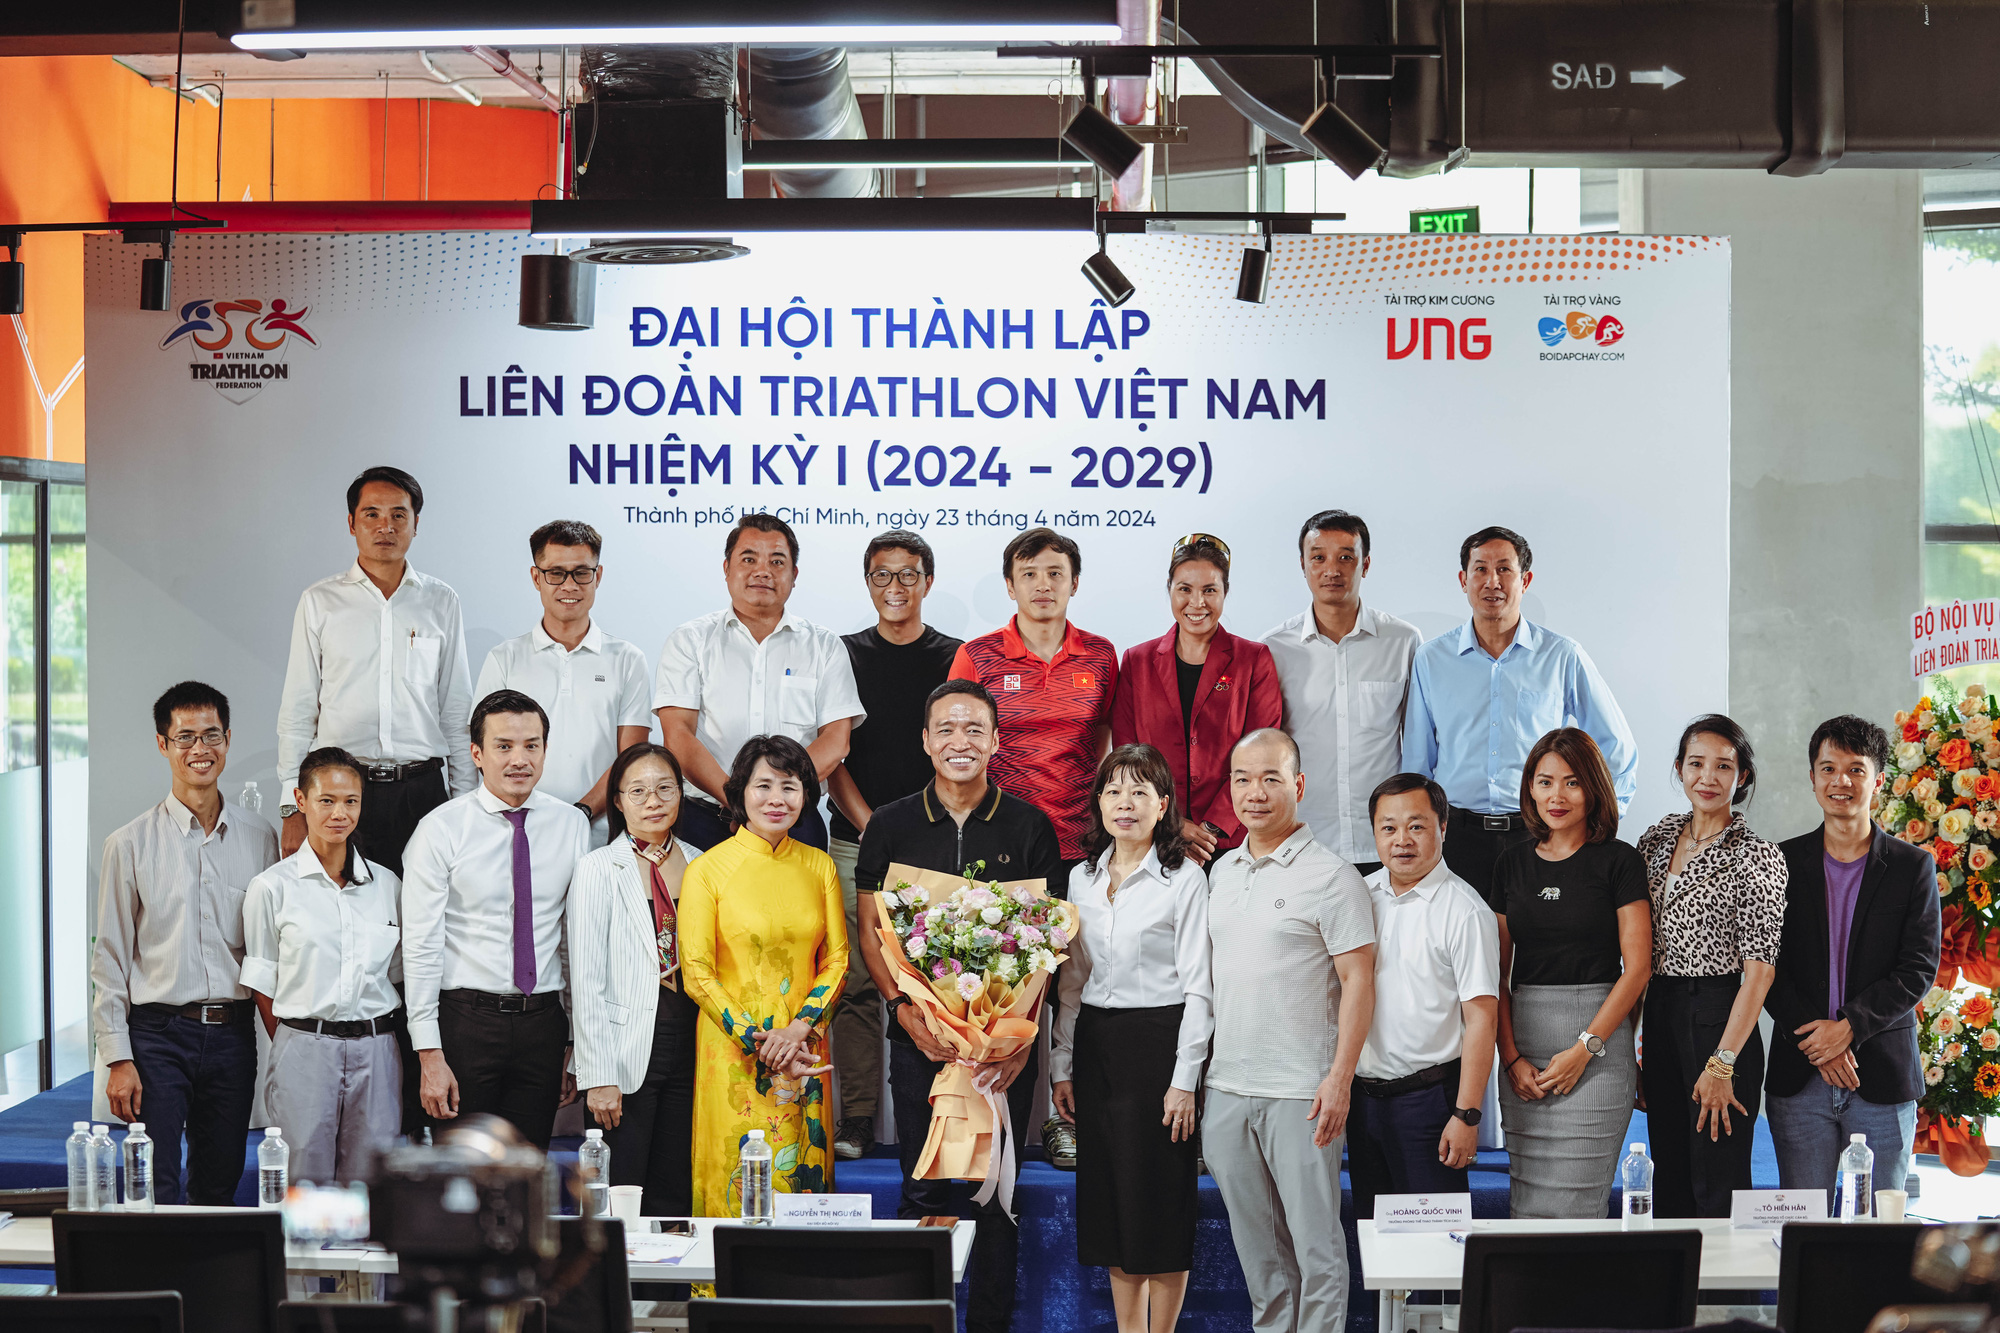 Delegates pose for a photo at the launching event for the Vietnam Triathlon Federation in Ho Chi Minh City, April 23, 2024. Photo: Vietnam Triathlon Federation